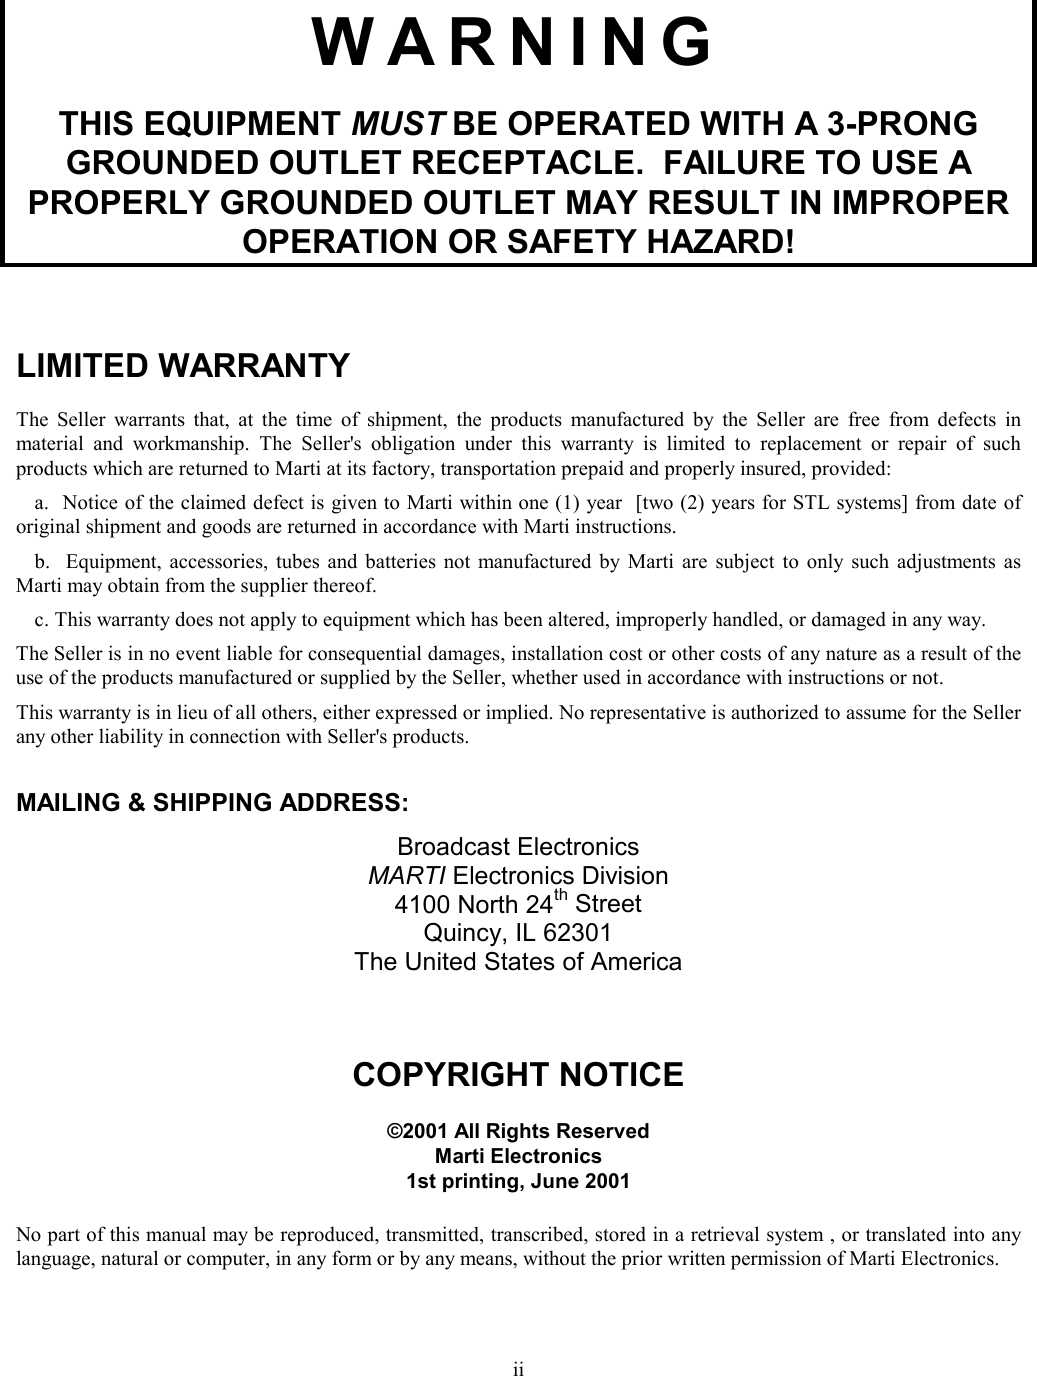 iiWARNINGTHIS EQUIPMENT MUST BE OPERATED WITH A 3-PRONGGROUNDED OUTLET RECEPTACLE.  FAILURE TO USE APROPERLY GROUNDED OUTLET MAY RESULT IN IMPROPEROPERATION OR SAFETY HAZARD!LIMITED WARRANTYThe Seller warrants that, at the time of shipment, the products manufactured by the Seller are free from defects inmaterial and workmanship. The Seller&apos;s obligation under this warranty is limited to replacement or repair of suchproducts which are returned to Marti at its factory, transportation prepaid and properly insured, provided:a.  Notice of the claimed defect is given to Marti within one (1) year  [two (2) years for STL systems] from date oforiginal shipment and goods are returned in accordance with Marti instructions.b.  Equipment, accessories, tubes and batteries not manufactured by Marti are subject to only such adjustments asMarti may obtain from the supplier thereof.c. This warranty does not apply to equipment which has been altered, improperly handled, or damaged in any way.The Seller is in no event liable for consequential damages, installation cost or other costs of any nature as a result of theuse of the products manufactured or supplied by the Seller, whether used in accordance with instructions or not.This warranty is in lieu of all others, either expressed or implied. No representative is authorized to assume for the Sellerany other liability in connection with Seller&apos;s products.MAILING &amp; SHIPPING ADDRESS:Broadcast ElectronicsMARTI Electronics Division4100 North 24th StreetQuincy, IL 62301The United States of AmericaCOPYRIGHT NOTICE©2001 All Rights ReservedMarti Electronics1st printing, June 2001No part of this manual may be reproduced, transmitted, transcribed, stored in a retrieval system , or translated into anylanguage, natural or computer, in any form or by any means, without the prior written permission of Marti Electronics.